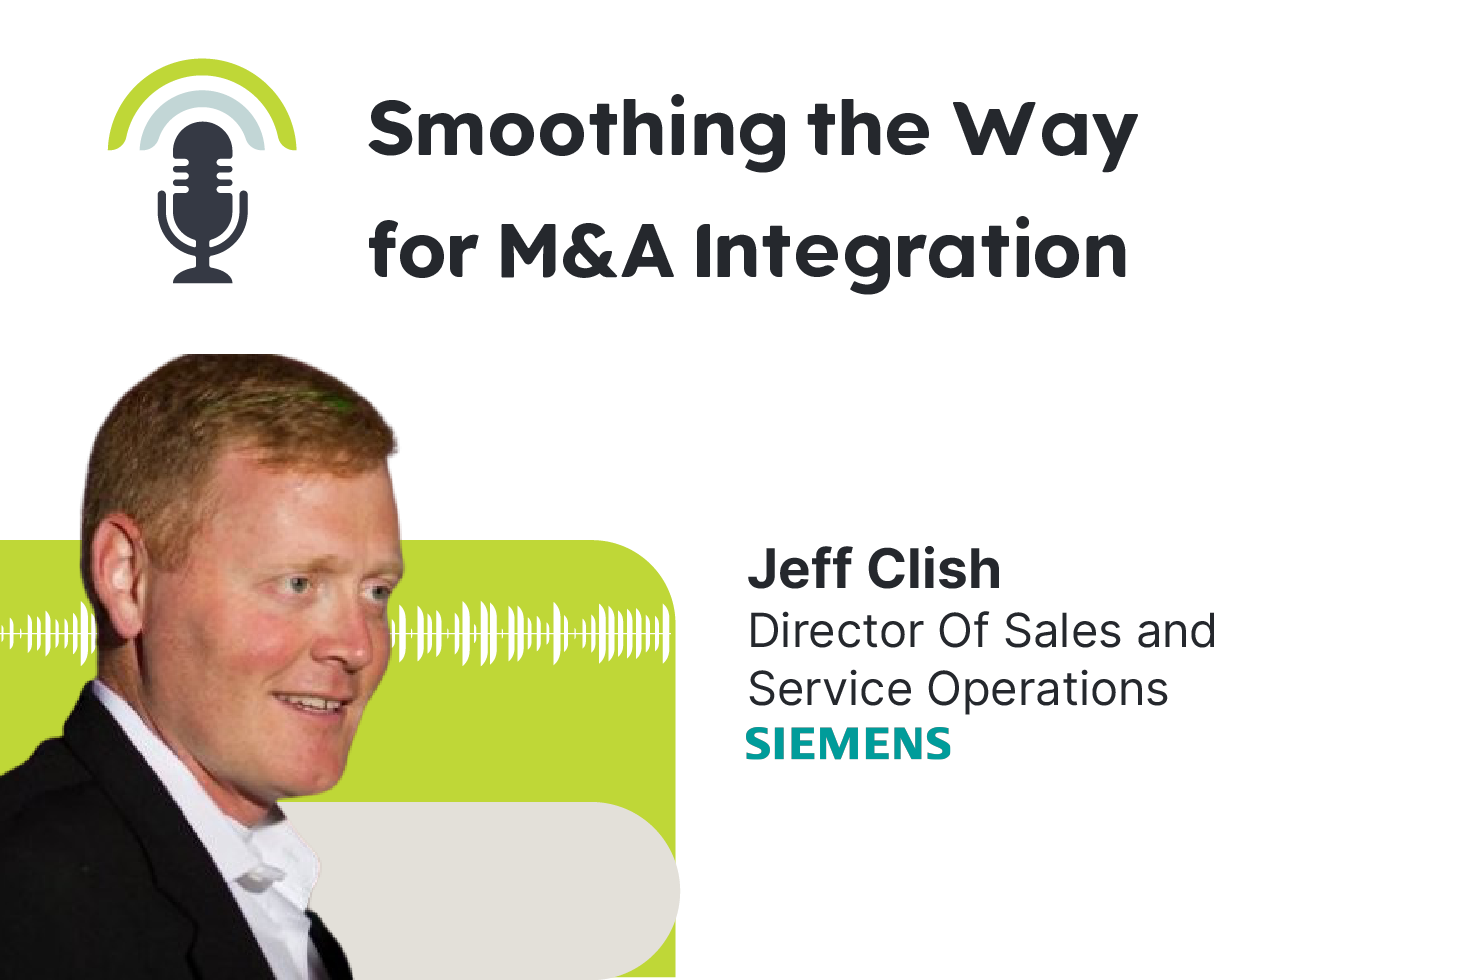 Smoothing the Way for M&A Integration